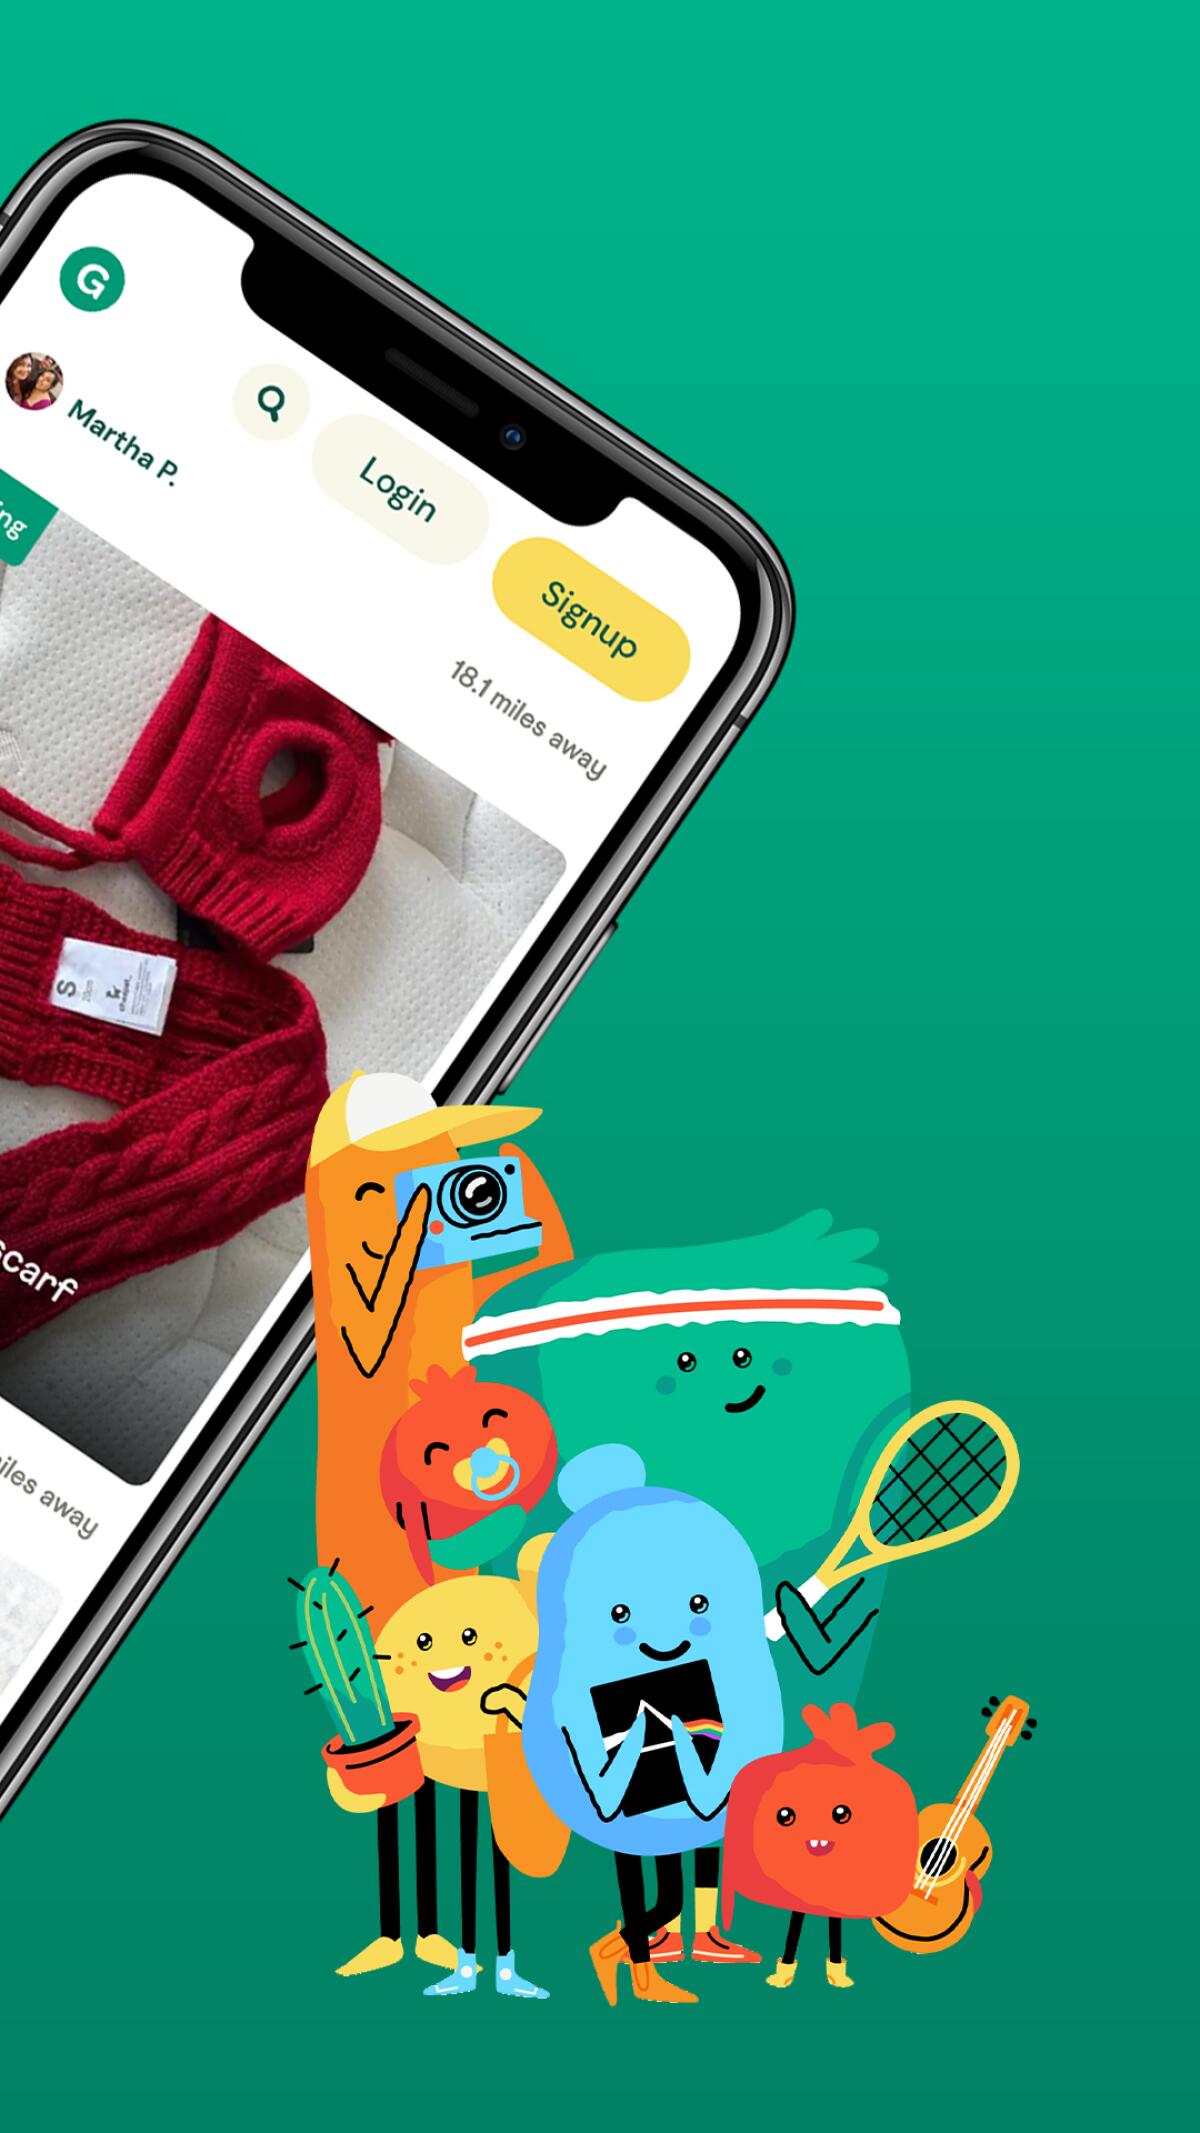 The Good Use Co. app enables users to give away items and make community connections.